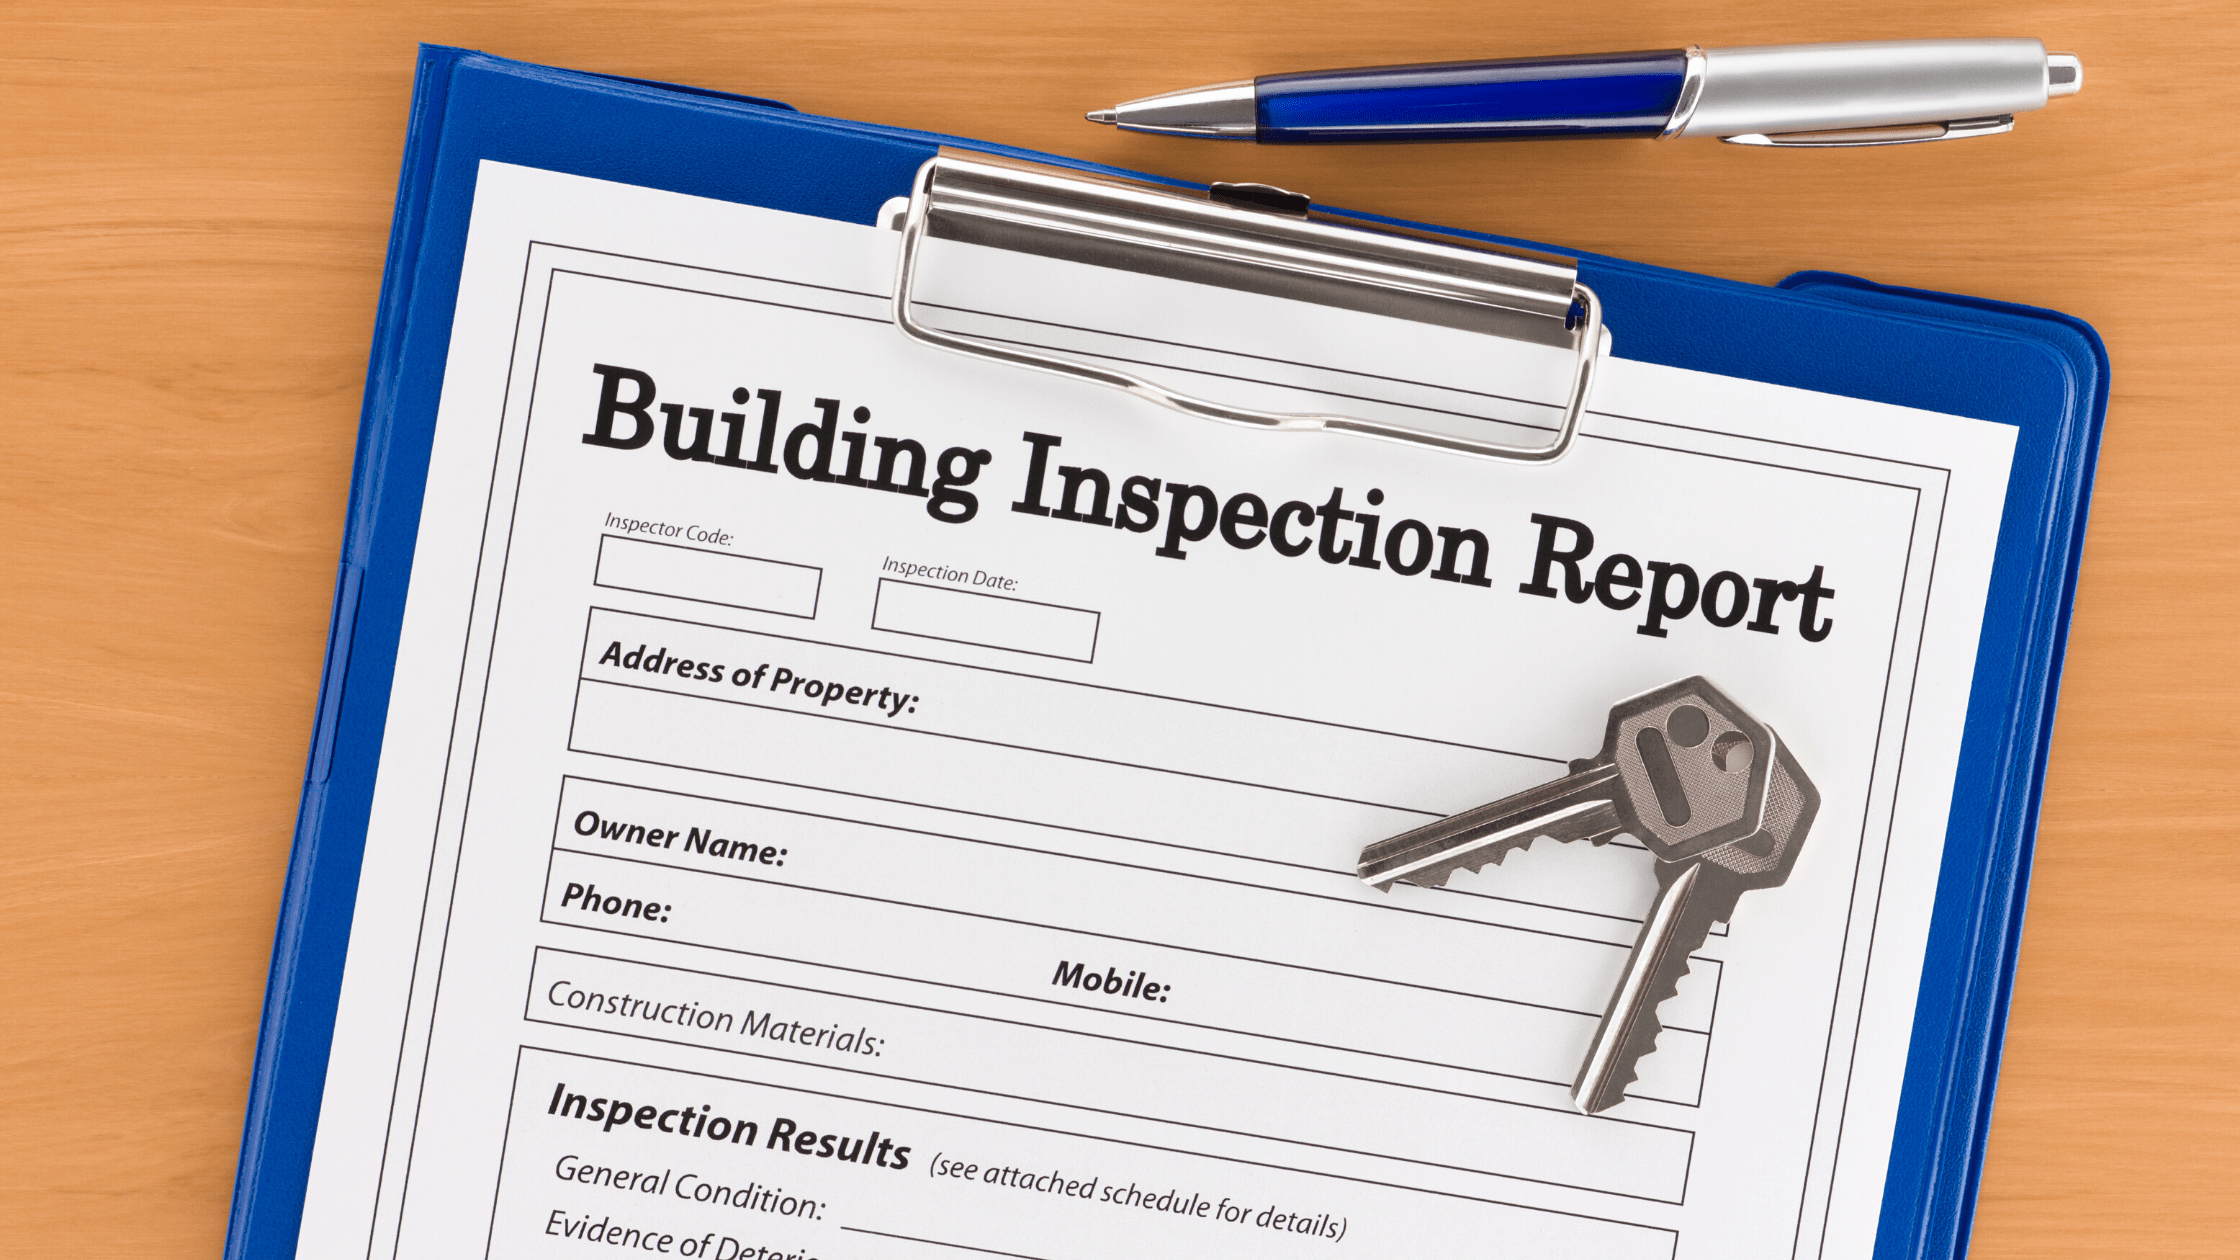 Home Inspections Before You Buy in Darling Downs Western Australia 2020 thumbnail